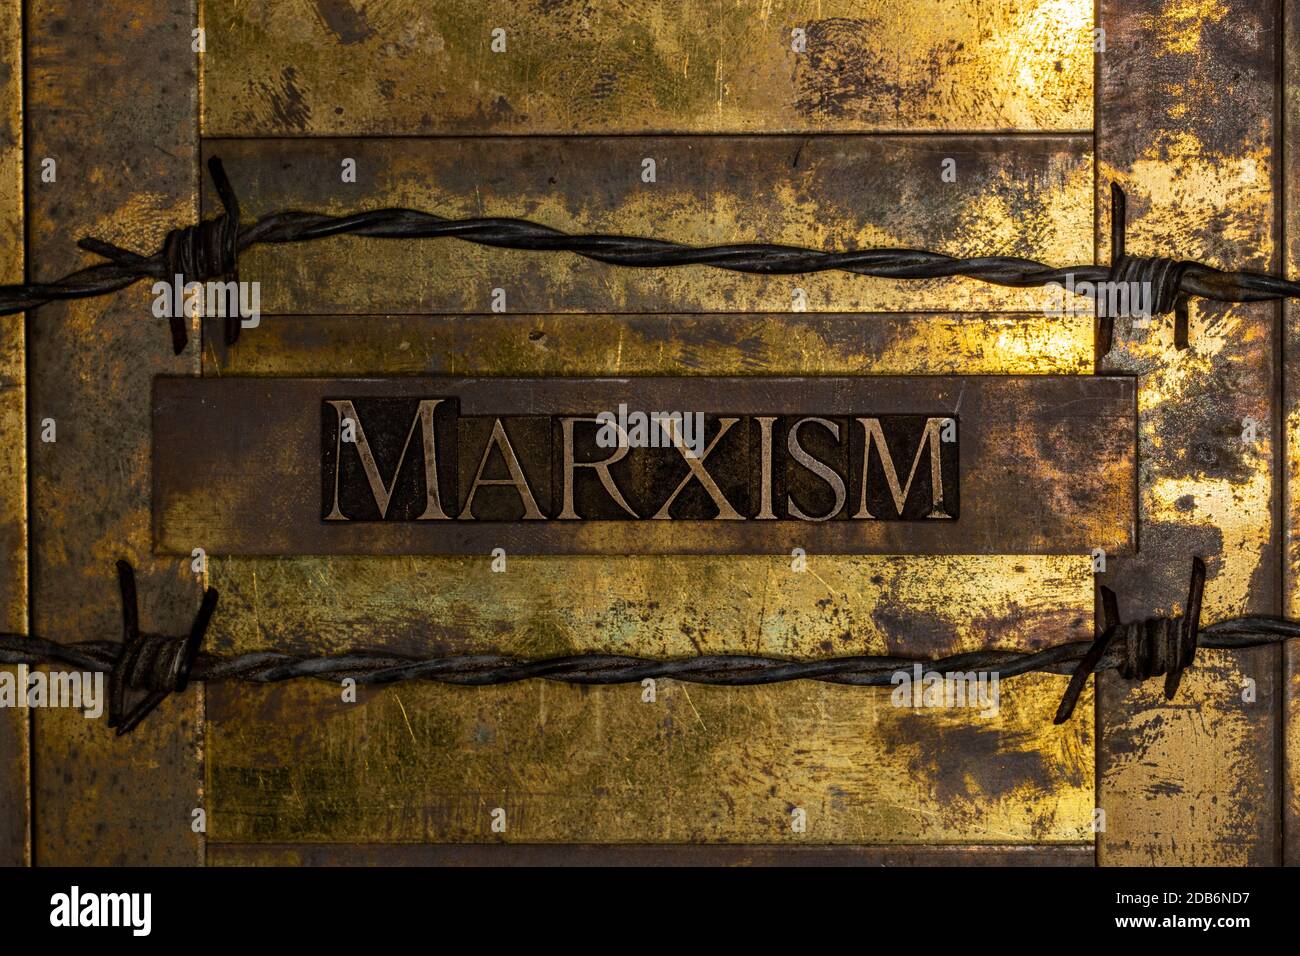 Marxism text on vintage textured grunge copper and gold background lined with barbed wire Stock Photo